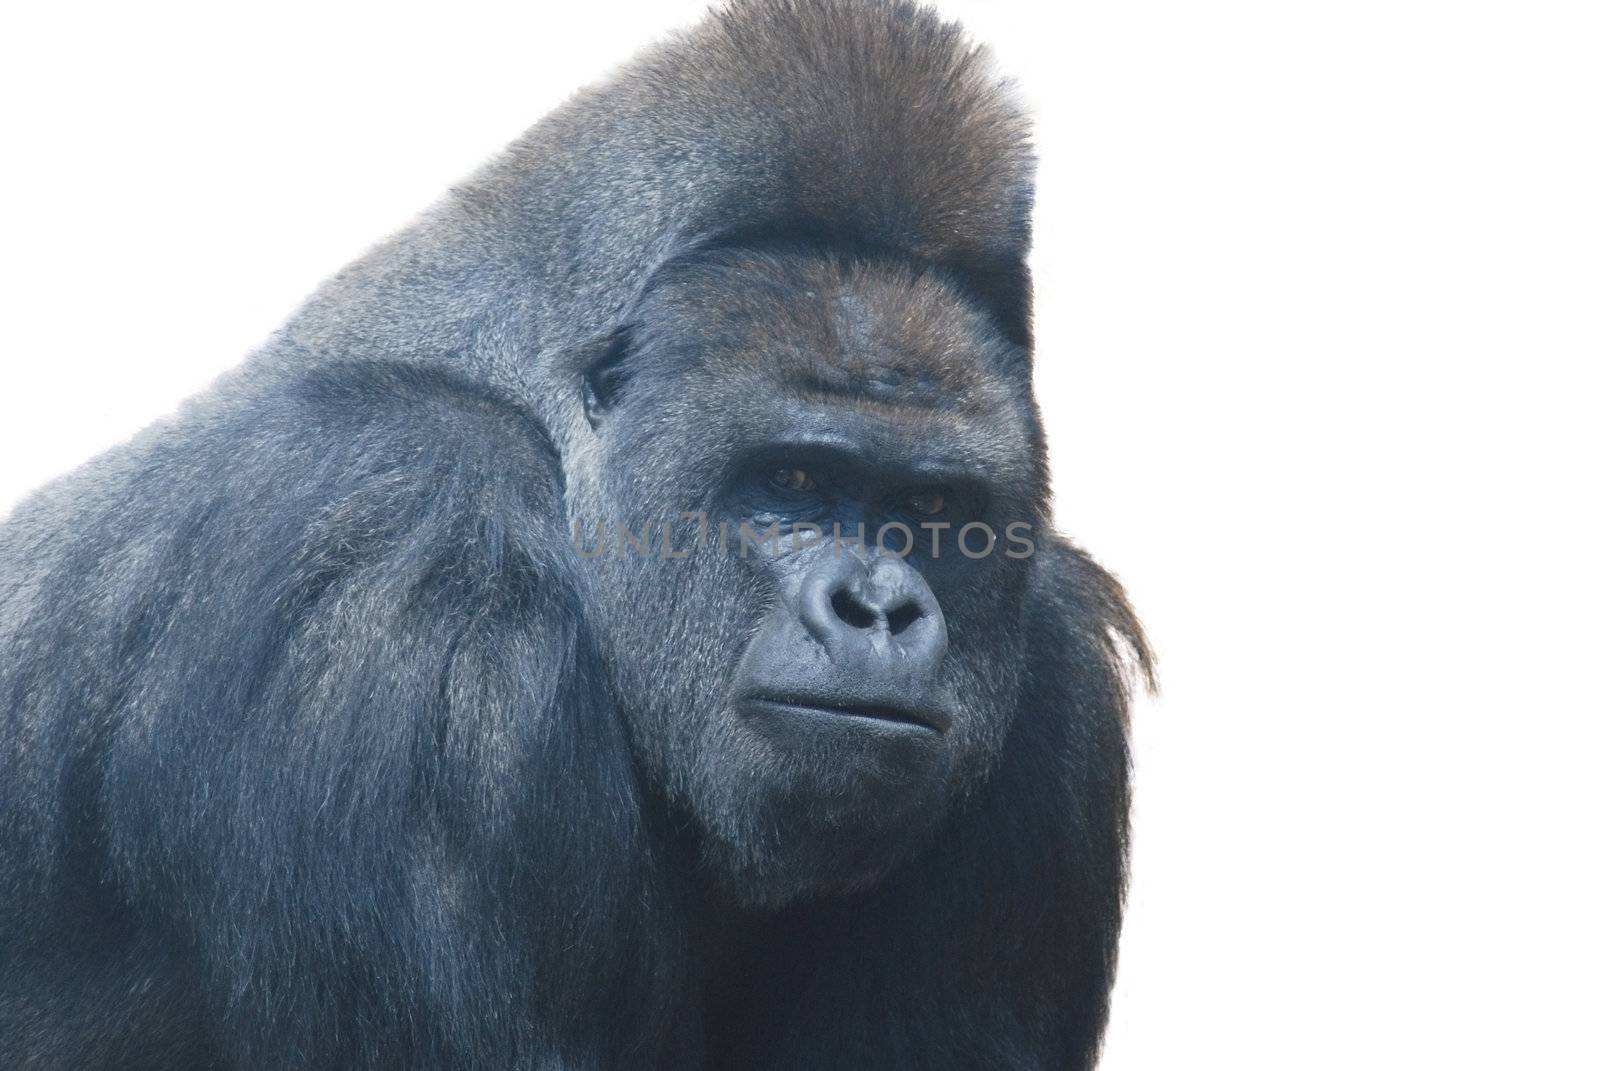 close up of a big black hairy gorilla isolated on white by svtrotof